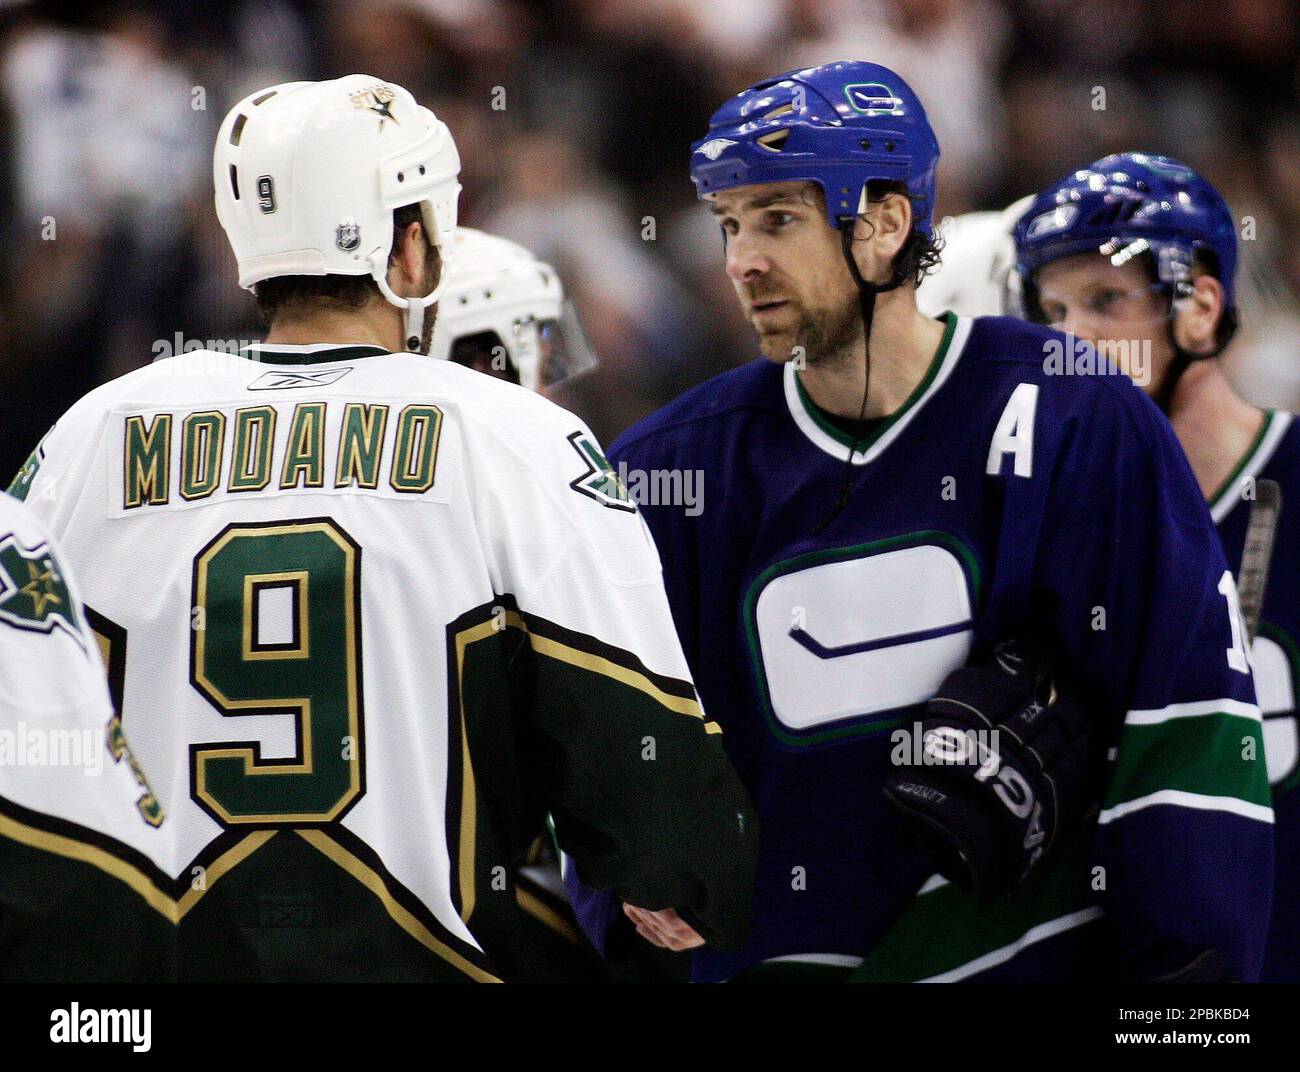 vancouver-canucks-trevor-linden-right-and-dallas-stars-mike-modano-shake-hands-after-the-canucks-defeated-the-stars-4-1-in-game-7-of-the-nhl-western-conference-quarterfinals-hockey-playoffs-in-vancouver-monday-april-23-2007-ap-photocp-richard-lam-canada-2PBKBD4.jpg